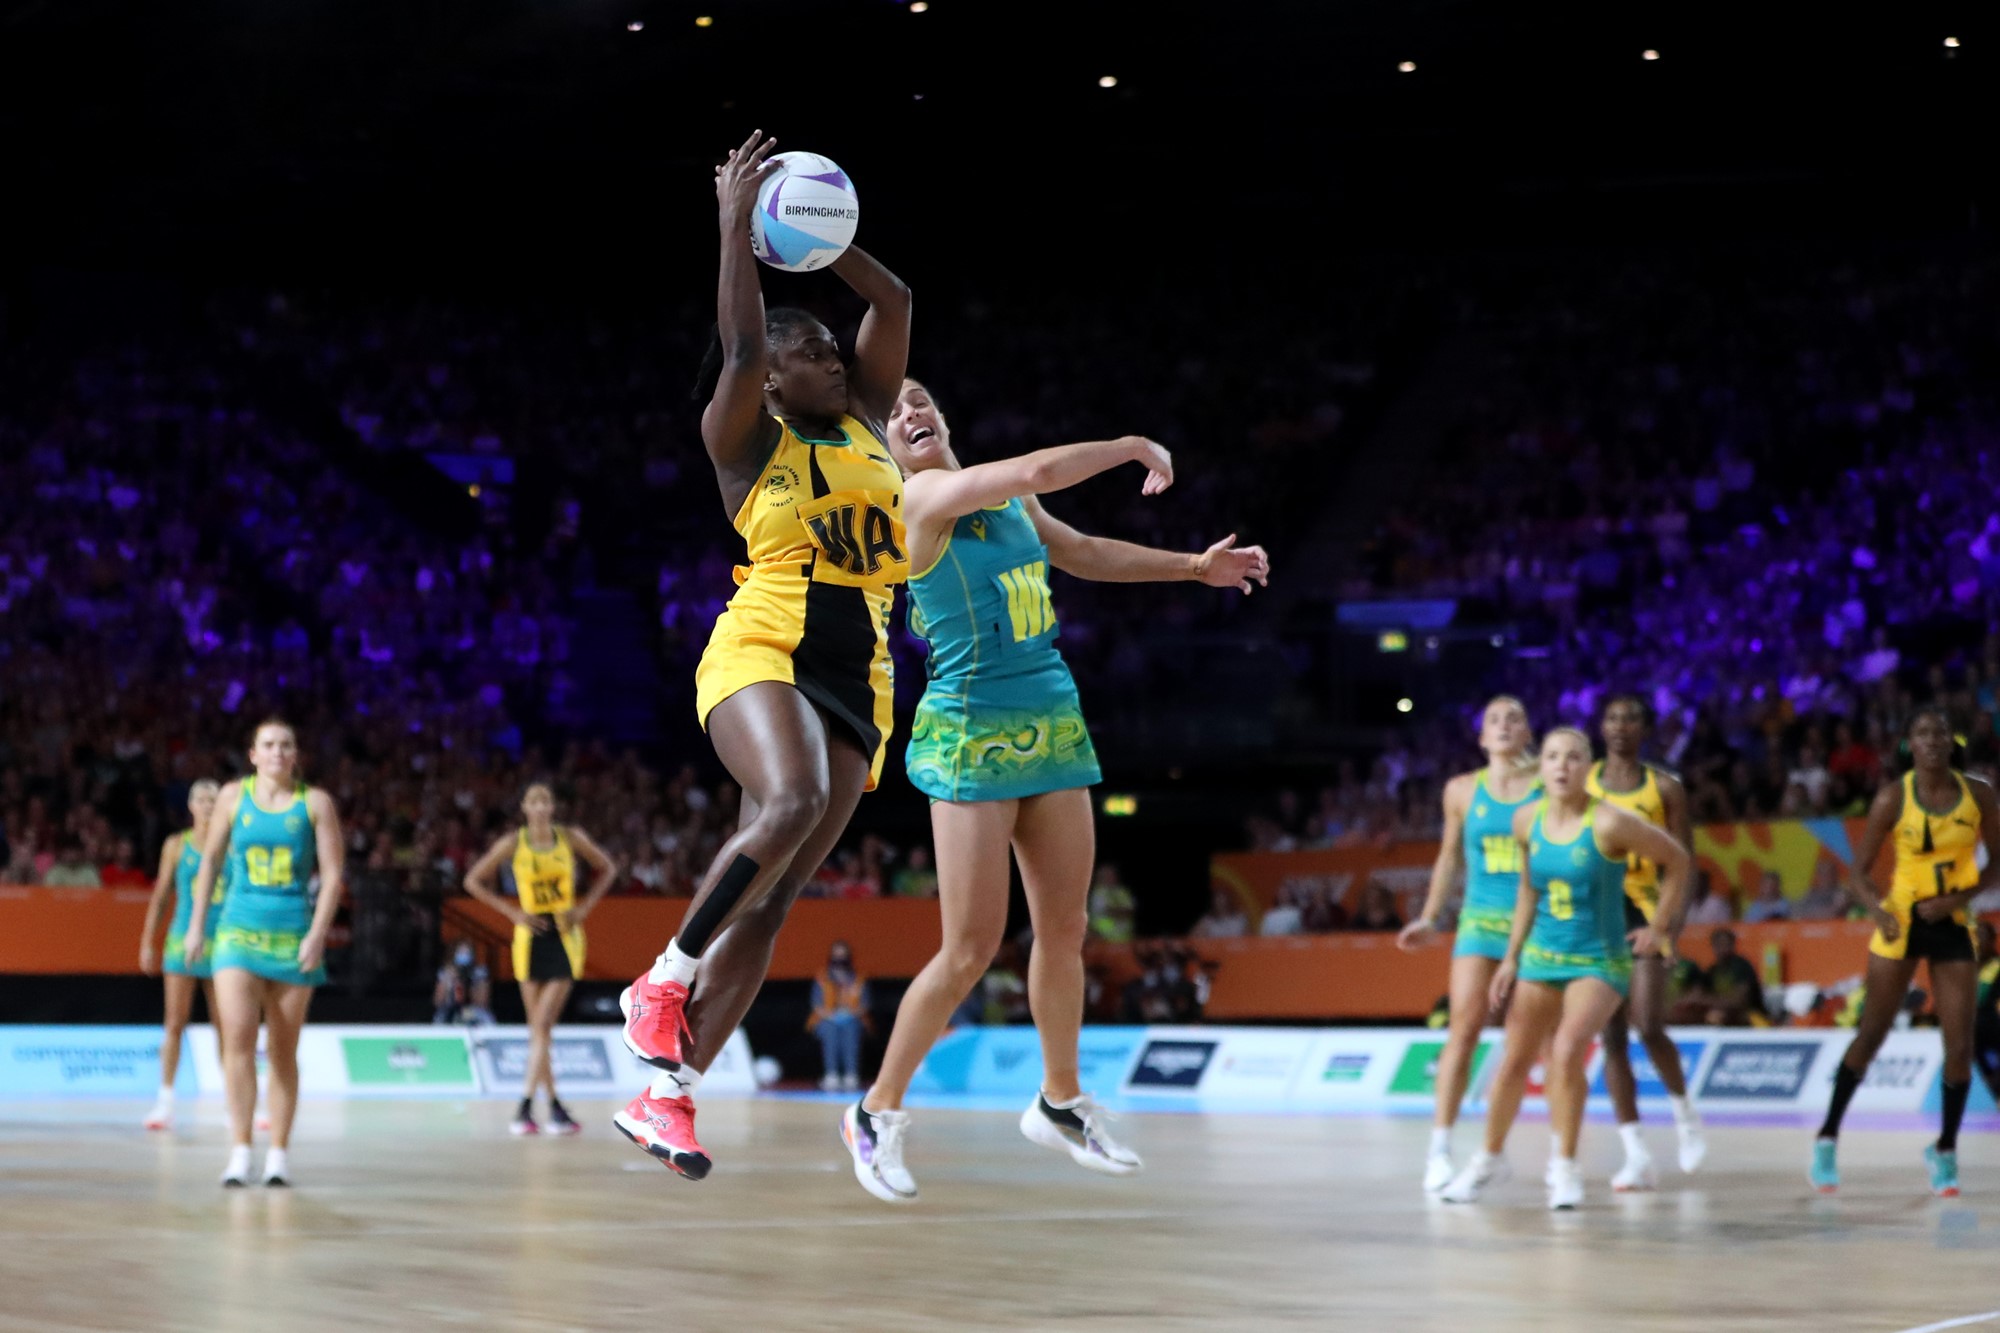 An Australian netball player and a Jamaican player jump for the ball in the Commonwealth Games gold medal match.